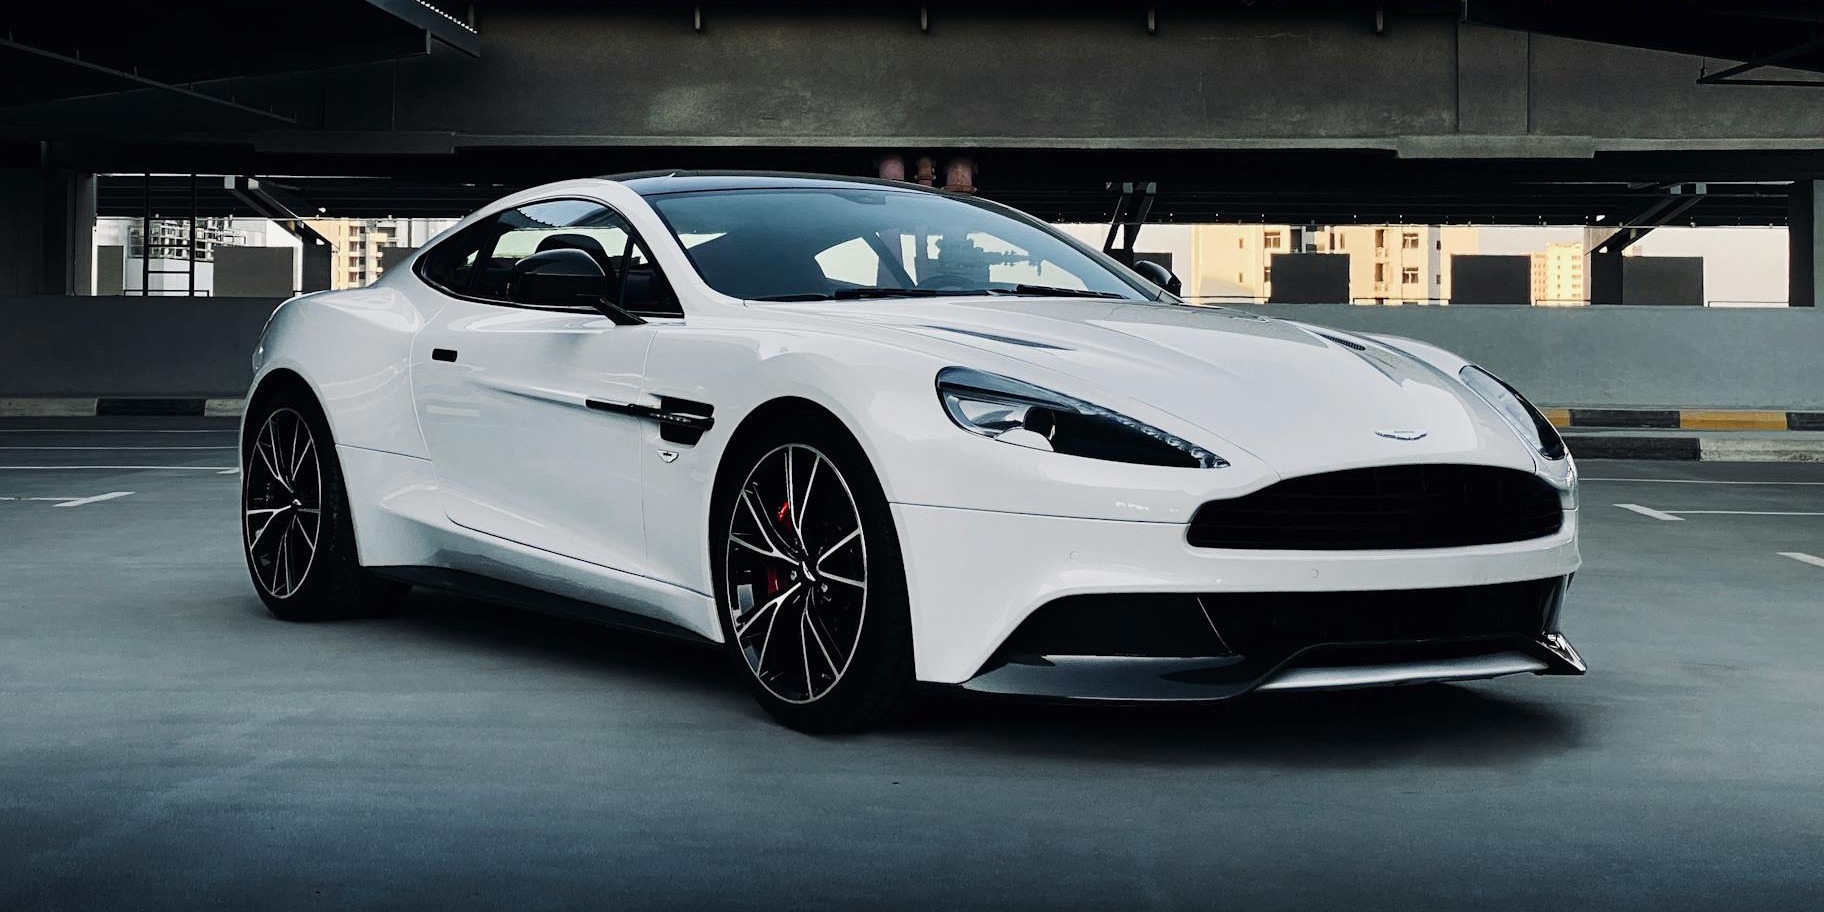 Why an Aston Martin Hire Is the Perfect Choice for Your Special UK Event